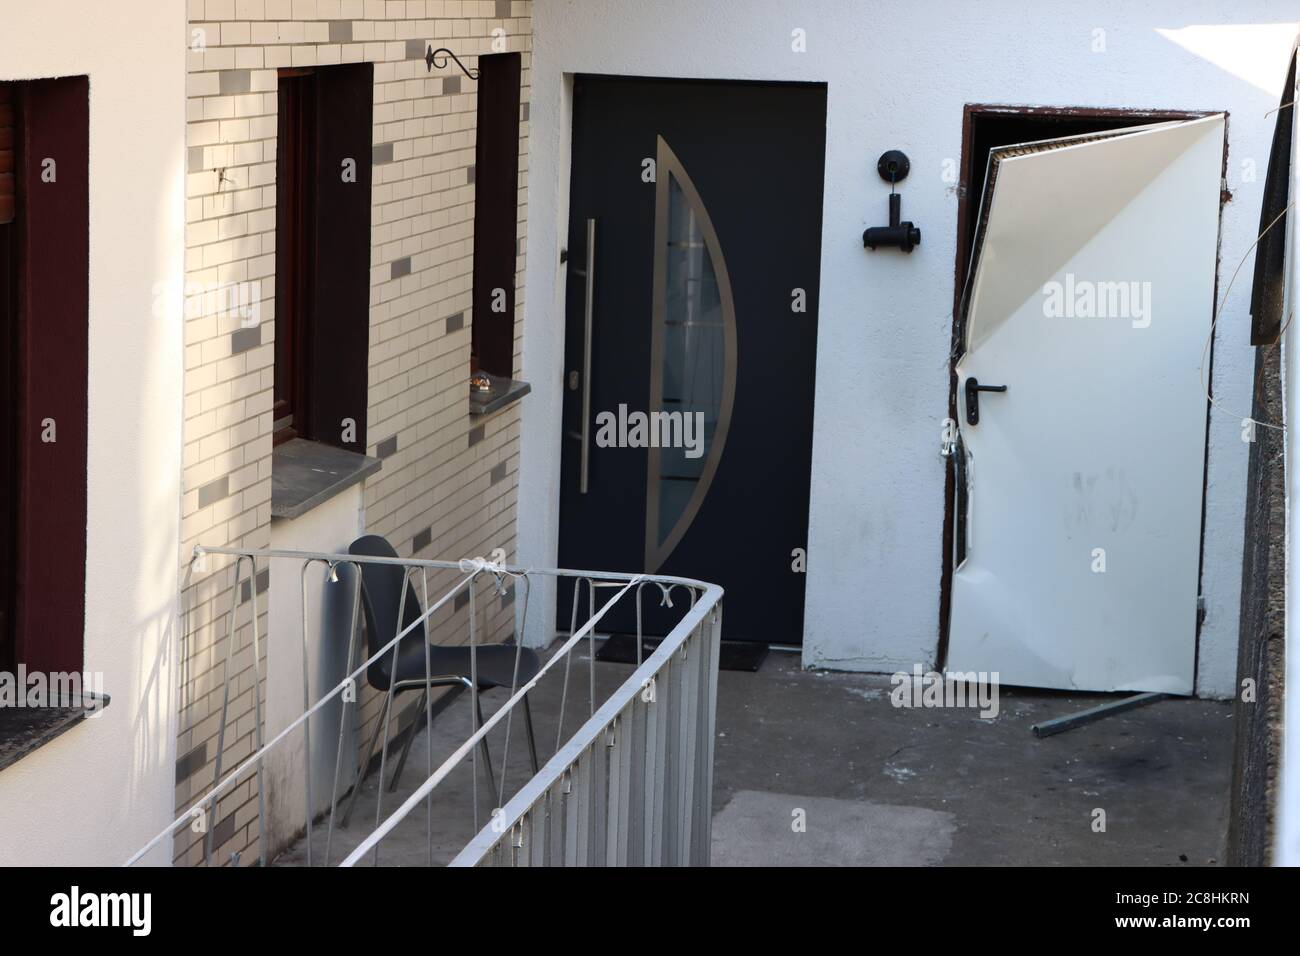 Schwerte, Germany. 23rd July, 2020. In Schwerte - village Ergste - there was an extortionate human robbery under Poland. You detained a compatriot in the apartment and tortured him. The judge issued an arrest warrant. (Photo by Lukas Pohland/Pacific Press) Credit: Pacific Press Agency/Alamy Live News Stock Photo